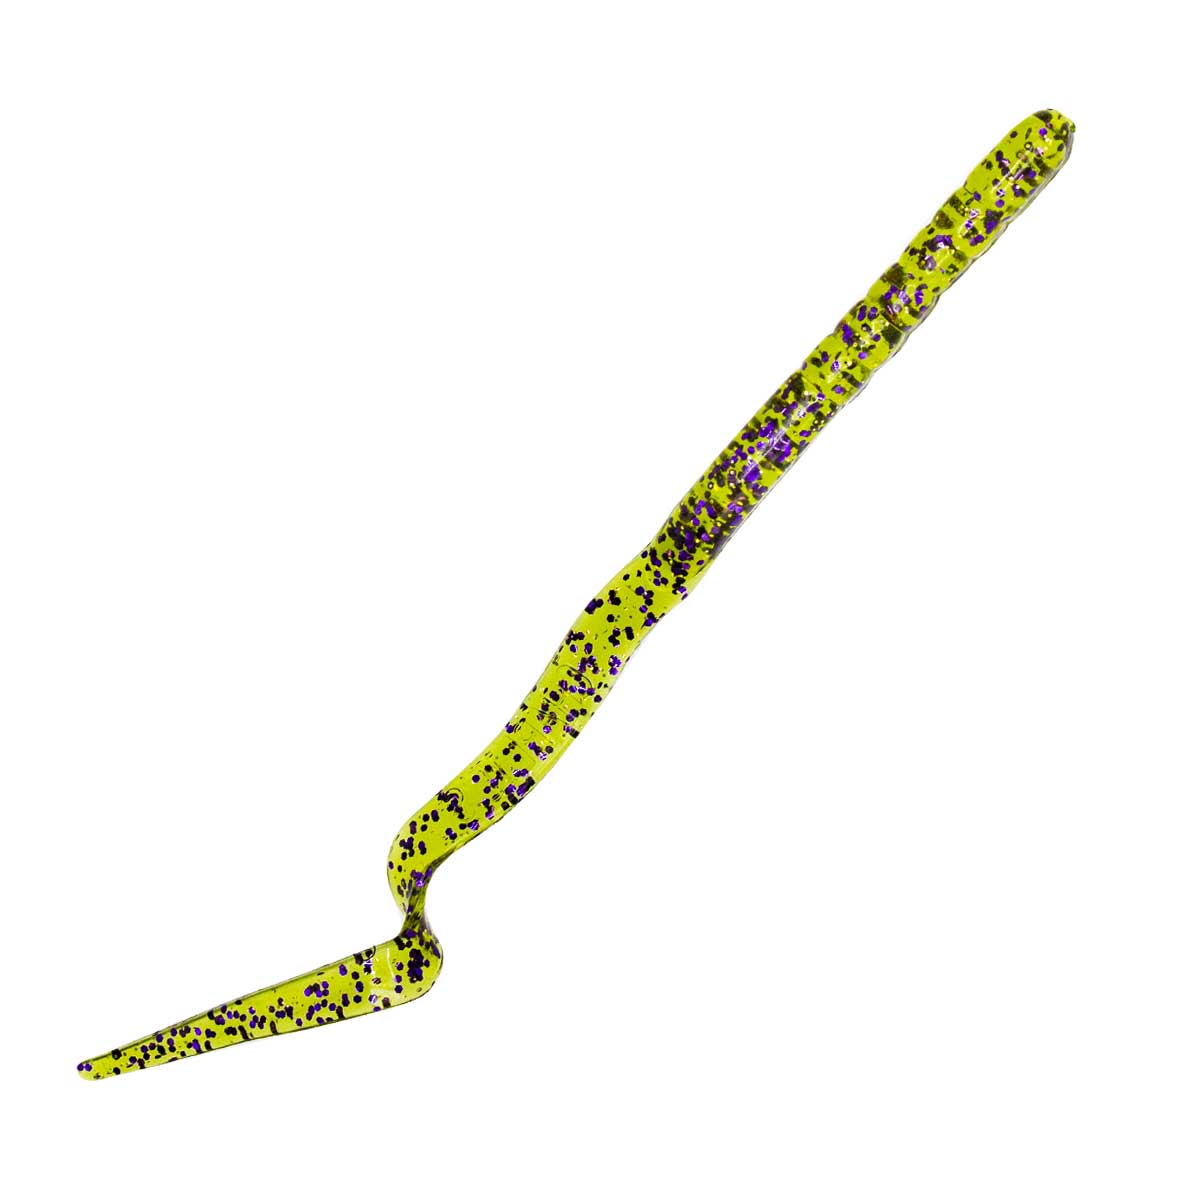  Charlie's Worms 8 Ribbon Tail Swimming Worm, Scented